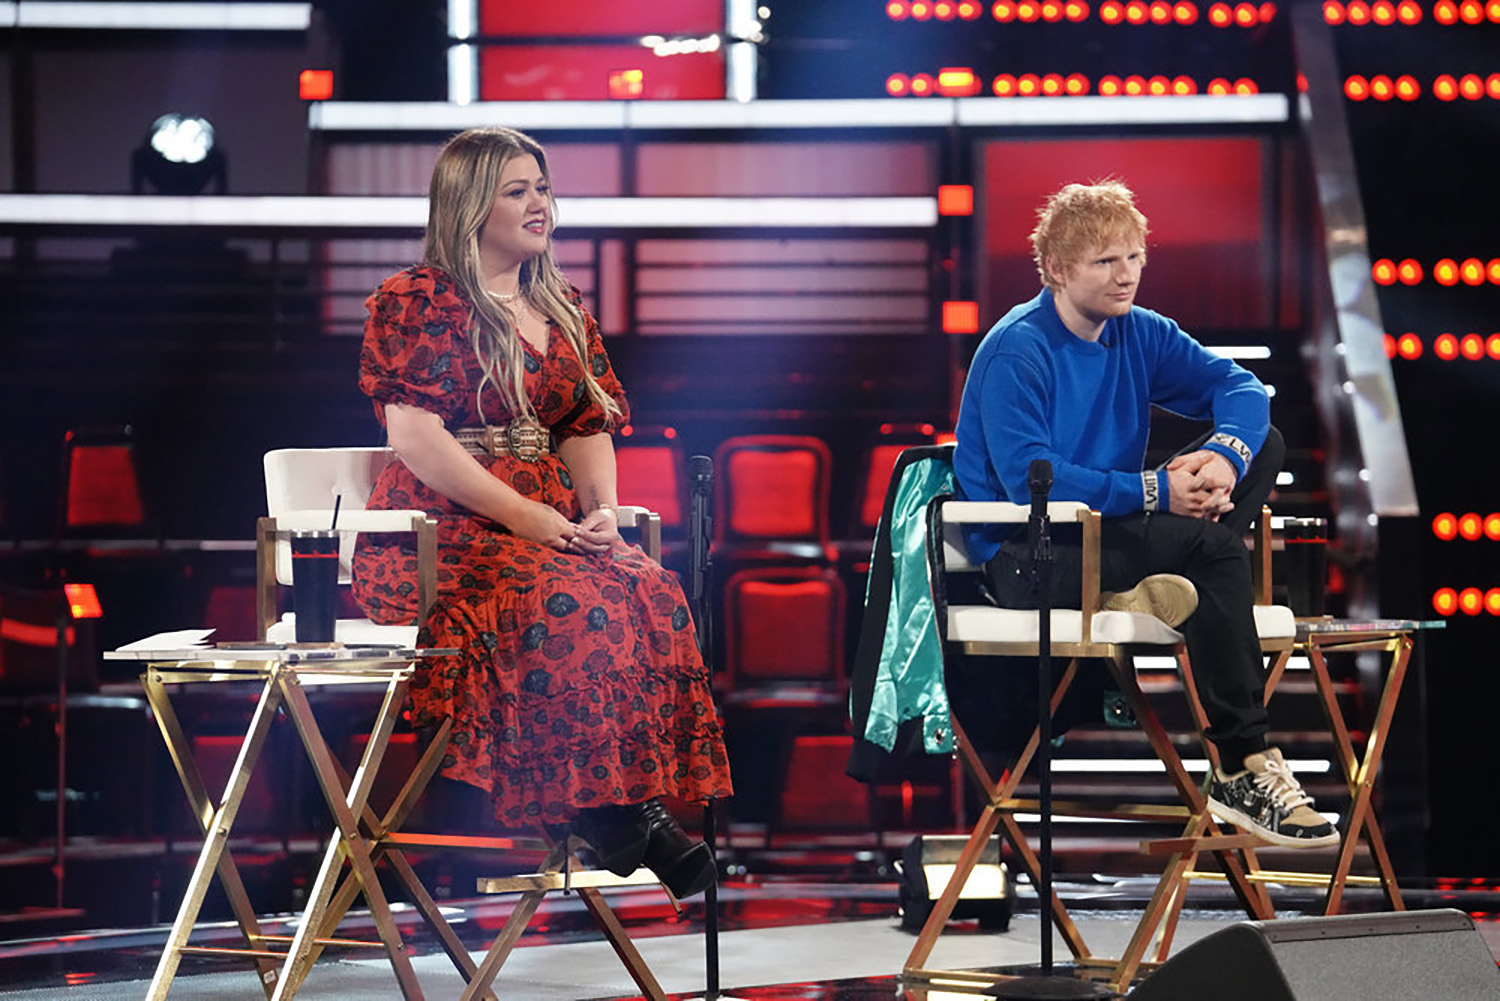 'The Voice' Mega Mentor Ed Sheeran Shares Video Proof That He Sang